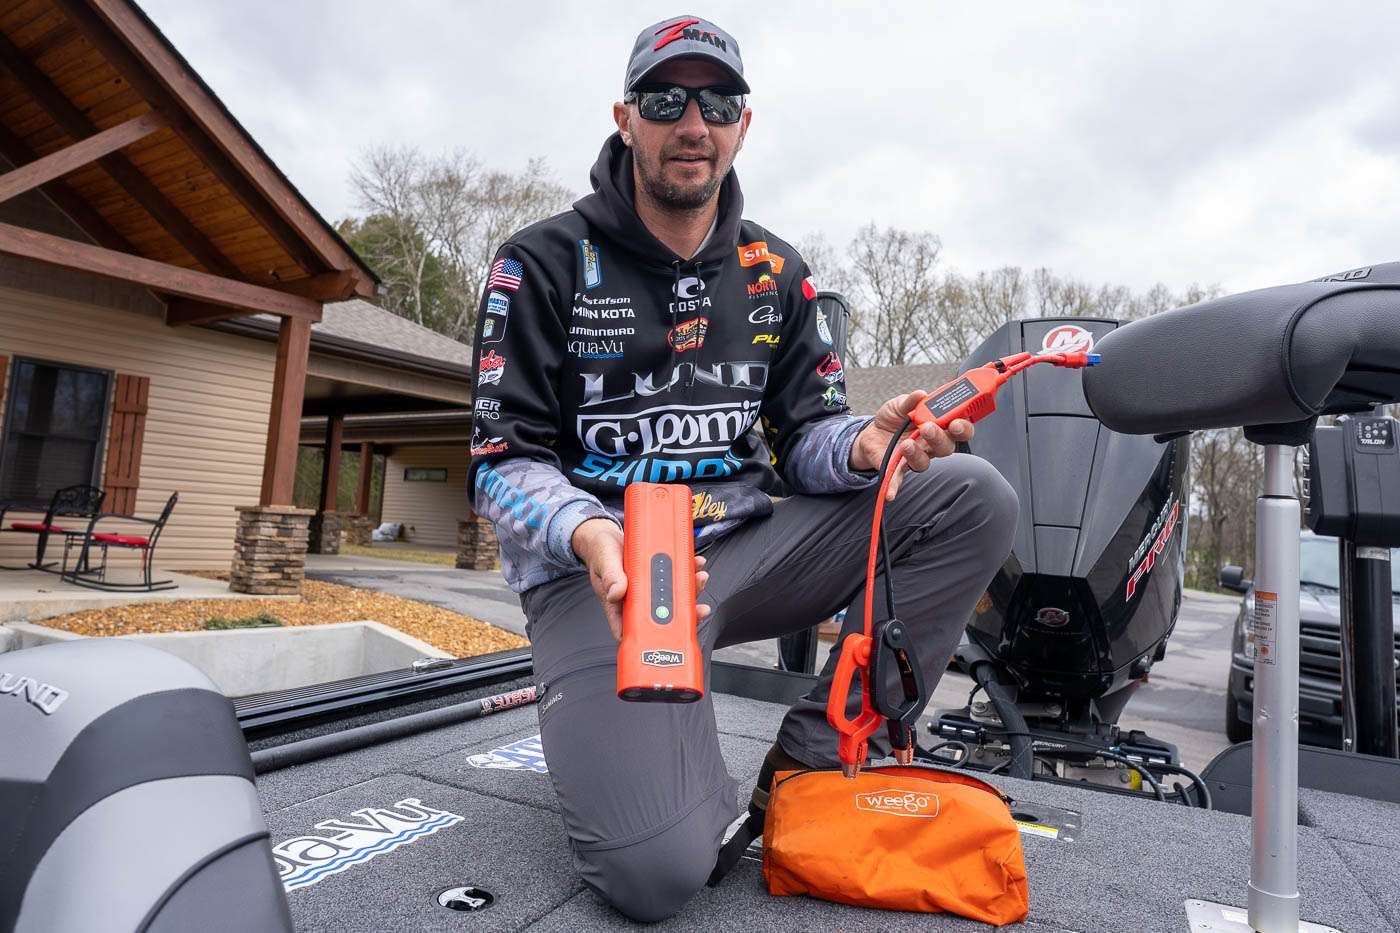 He's the third pro I've seen with one of these Weego jump starters. He's not sponsored by them. Call Gussy, Weego! He loves your product. He had to use it at Hartwell during an Elite, and it saved his day. 